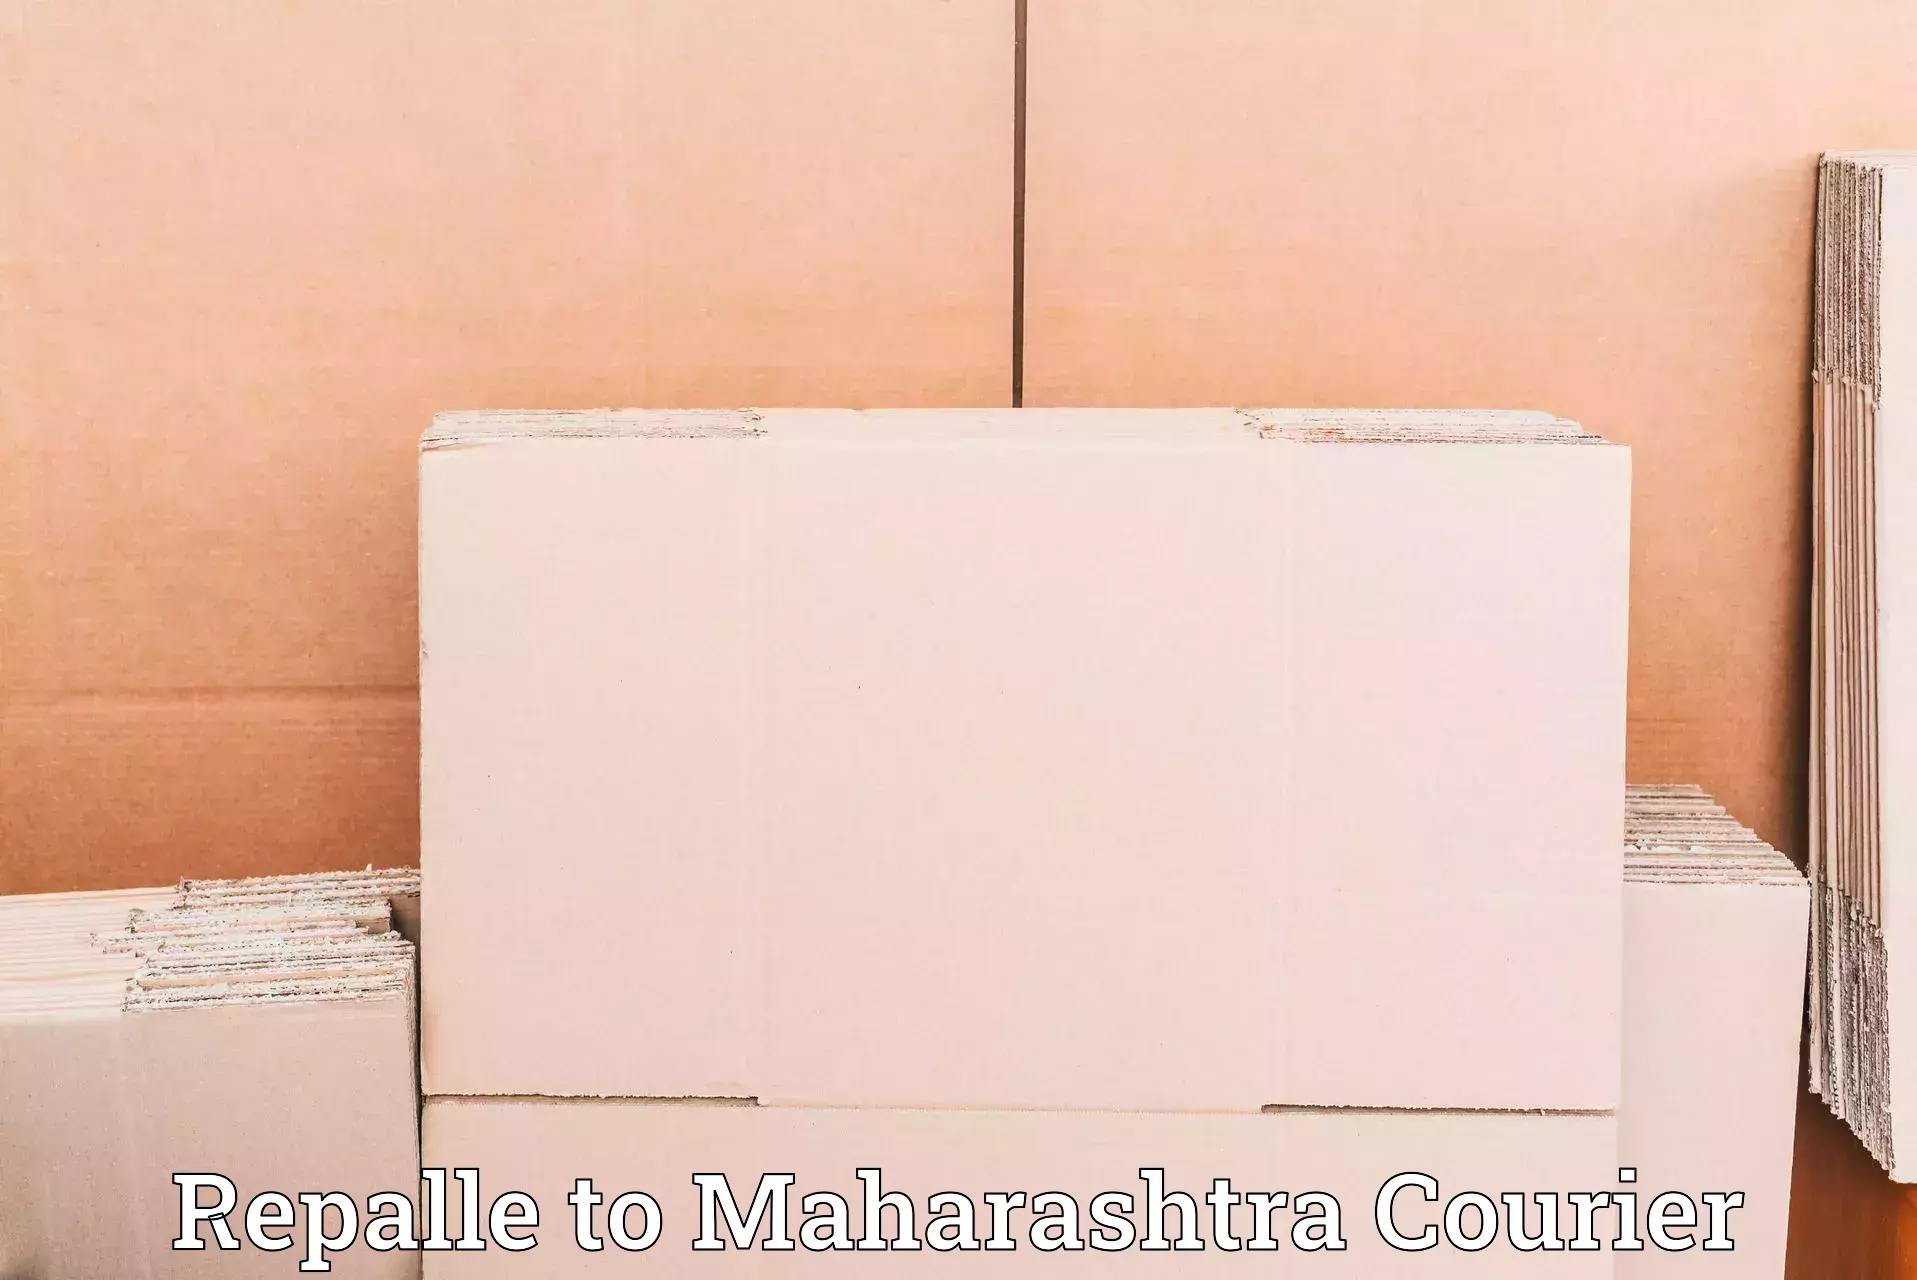 High-capacity courier solutions Repalle to Virar